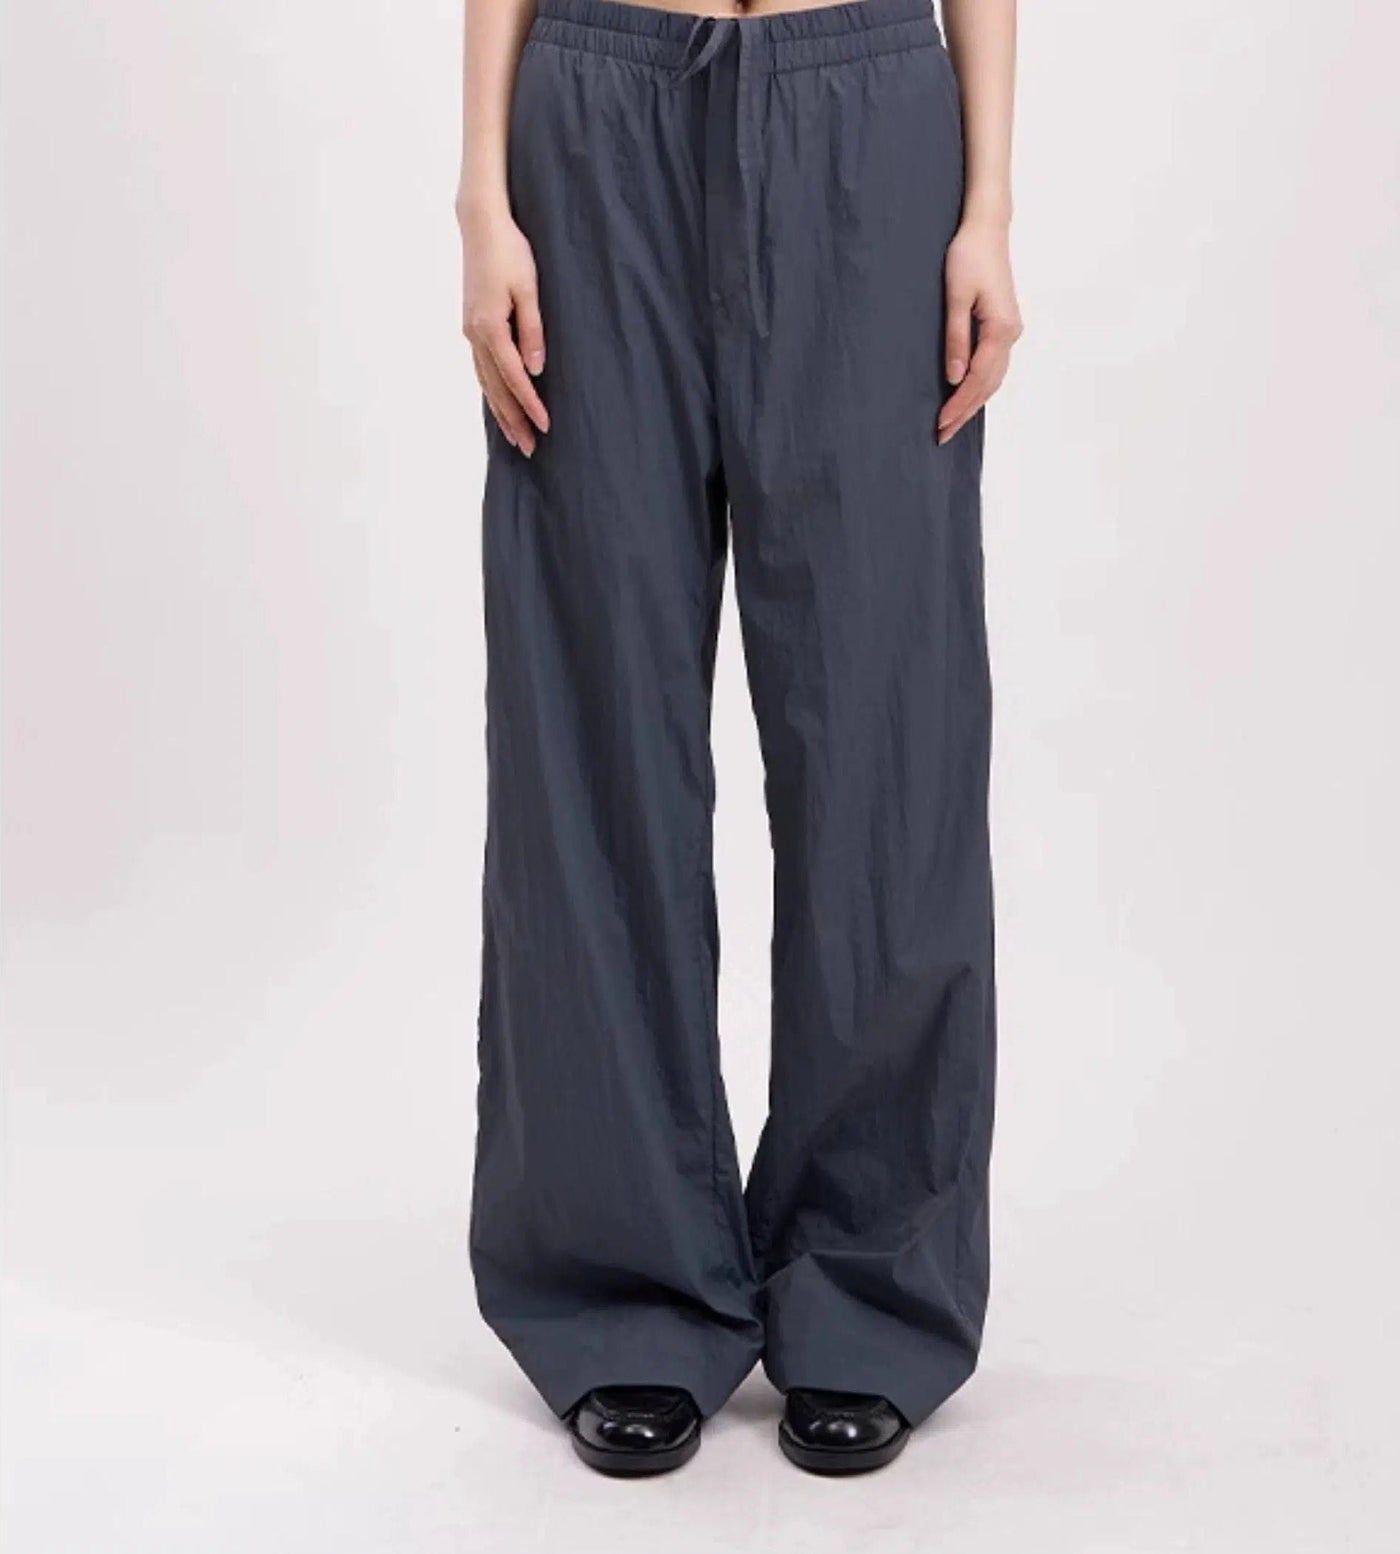 Light Elastic Waist Track Pants Korean Street Fashion Pants By Opicloth Shop Online at OH Vault